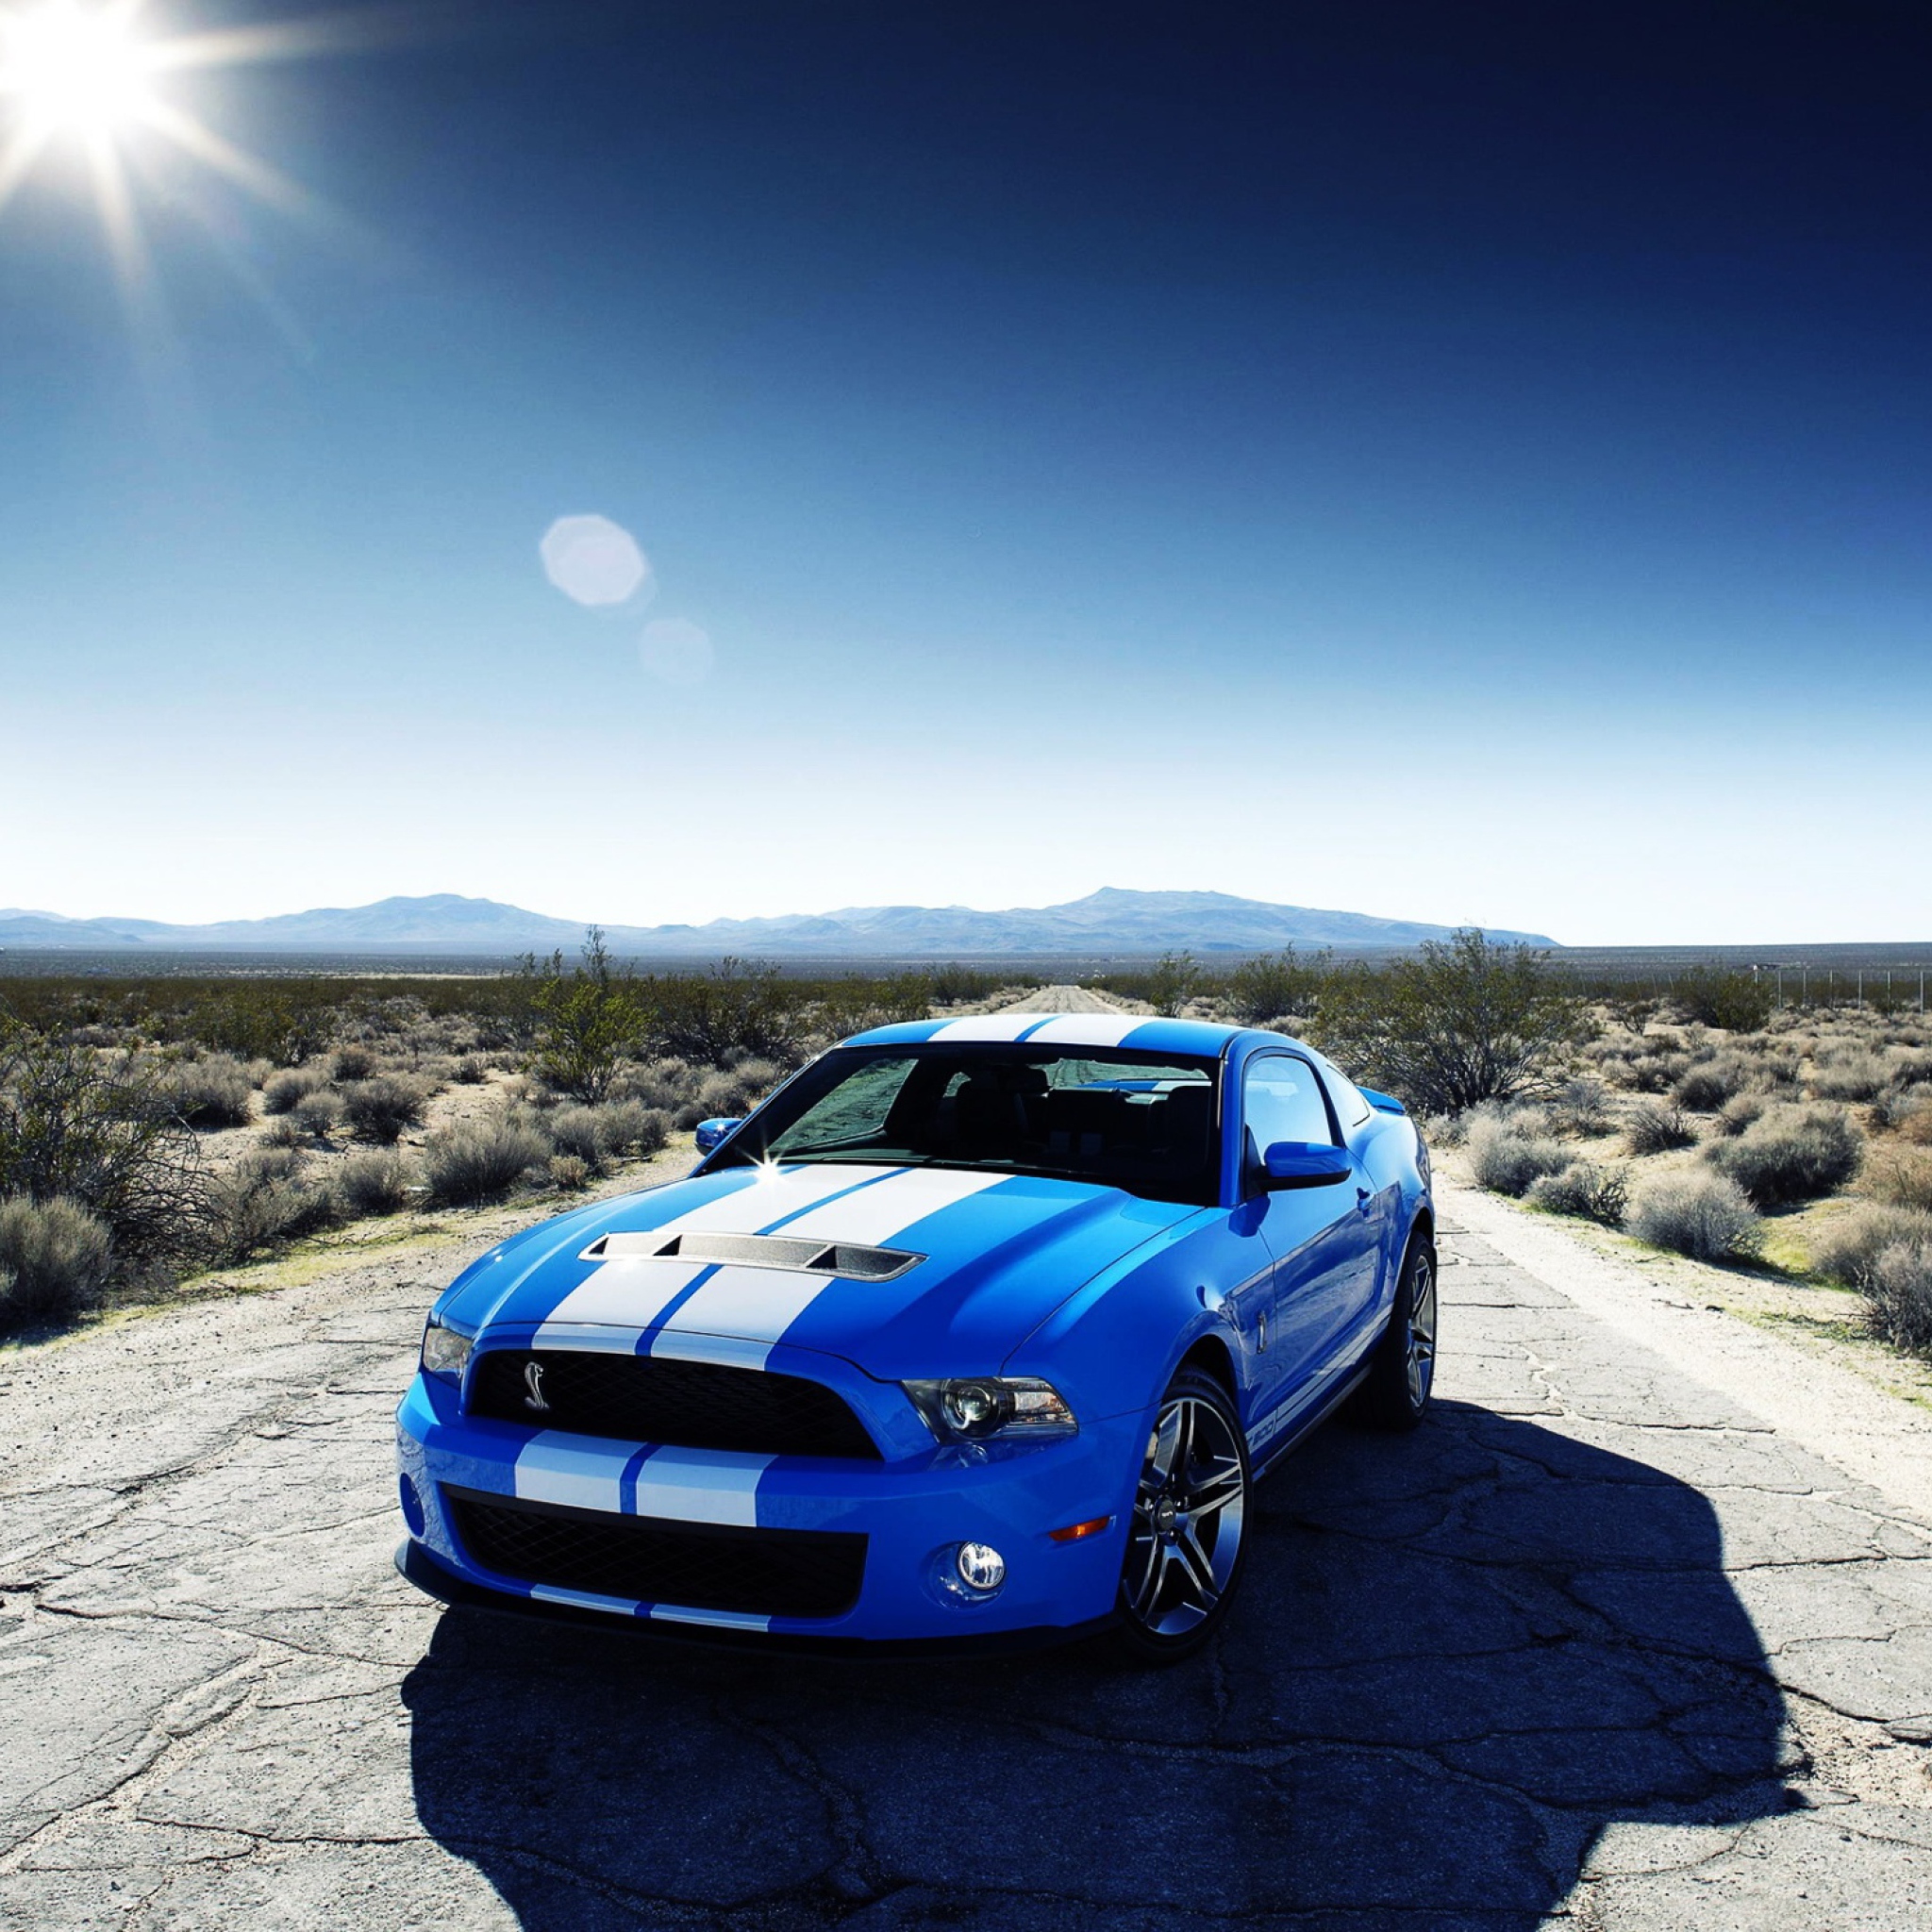 Ford Shelby Gt500 wallpaper 2048x2048